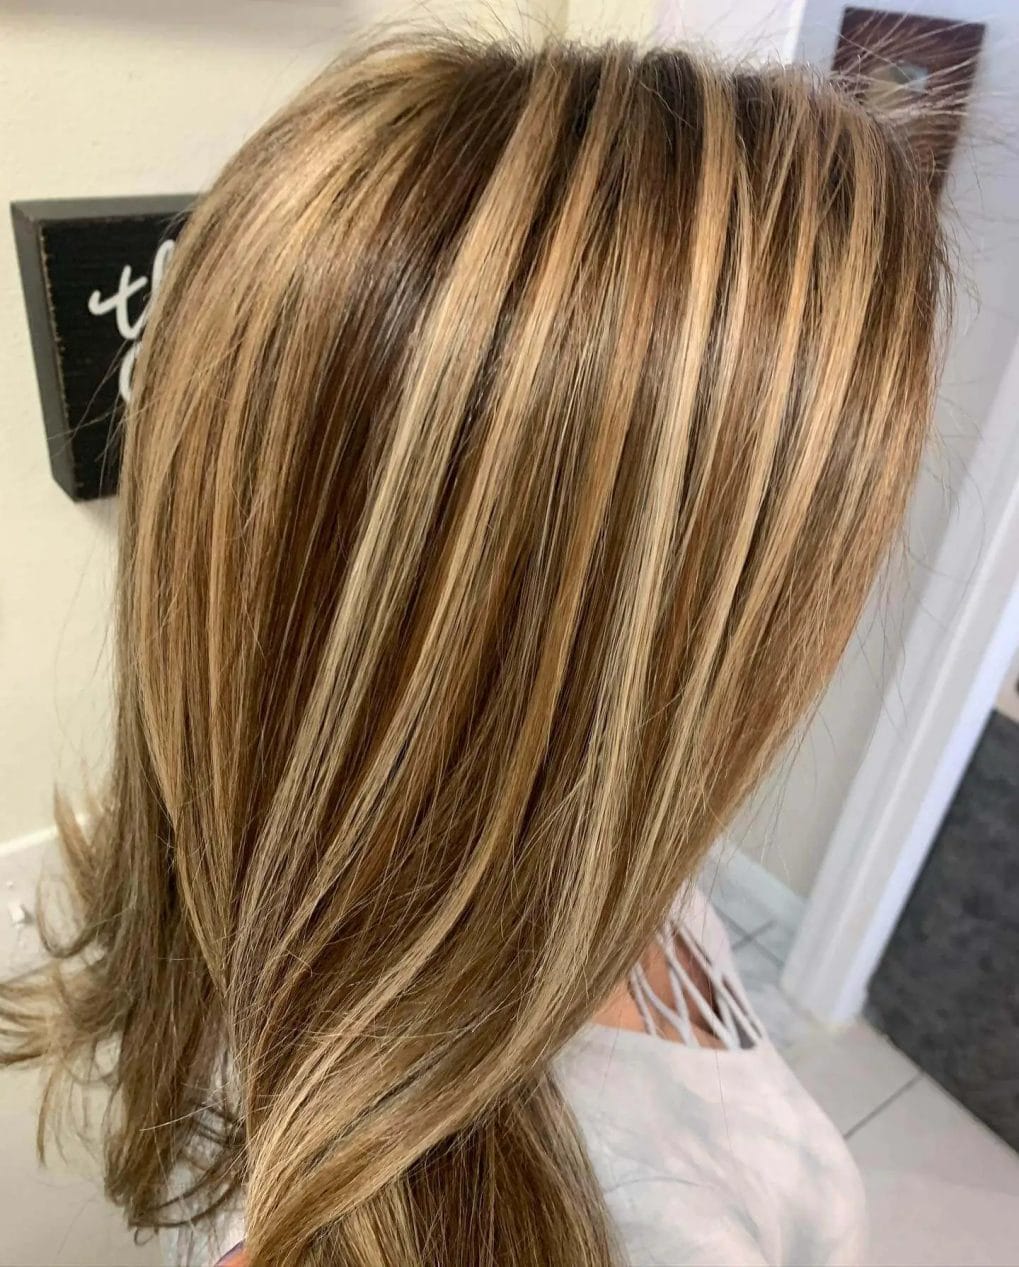 Long layers with honey and caramel chunky highlights, face-framing and voluminous.